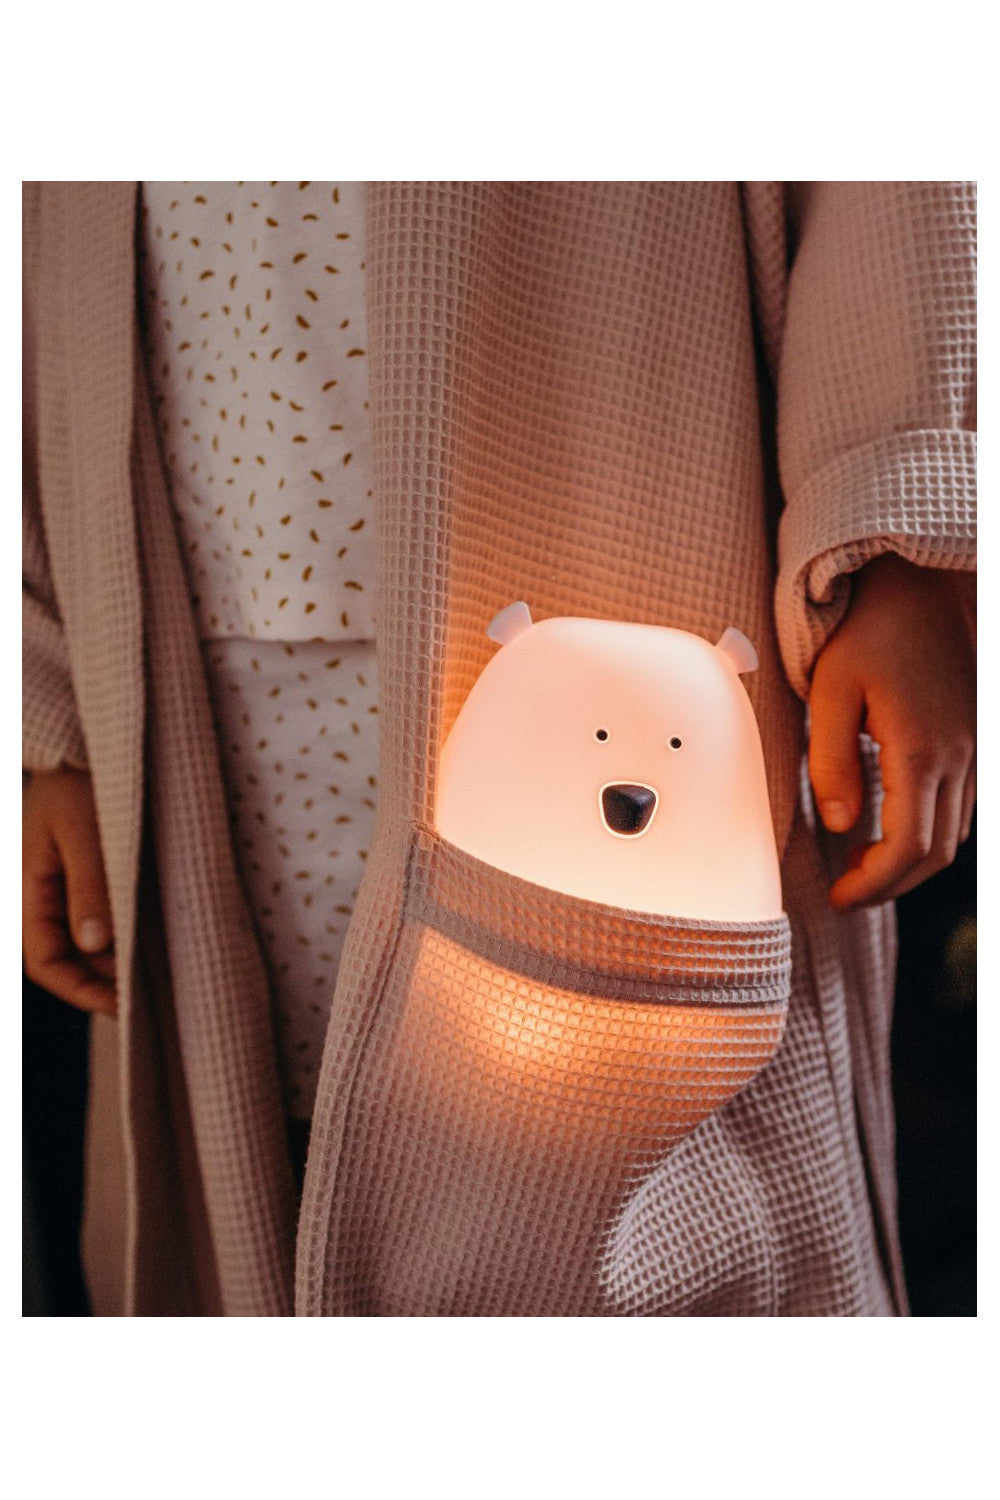 A white silicone lamp shaped like a teddy bear with a USB Type C power supply. Soft to touch, with LED light and auto-off feature after 2 hours. Ideal for bedtime routines.